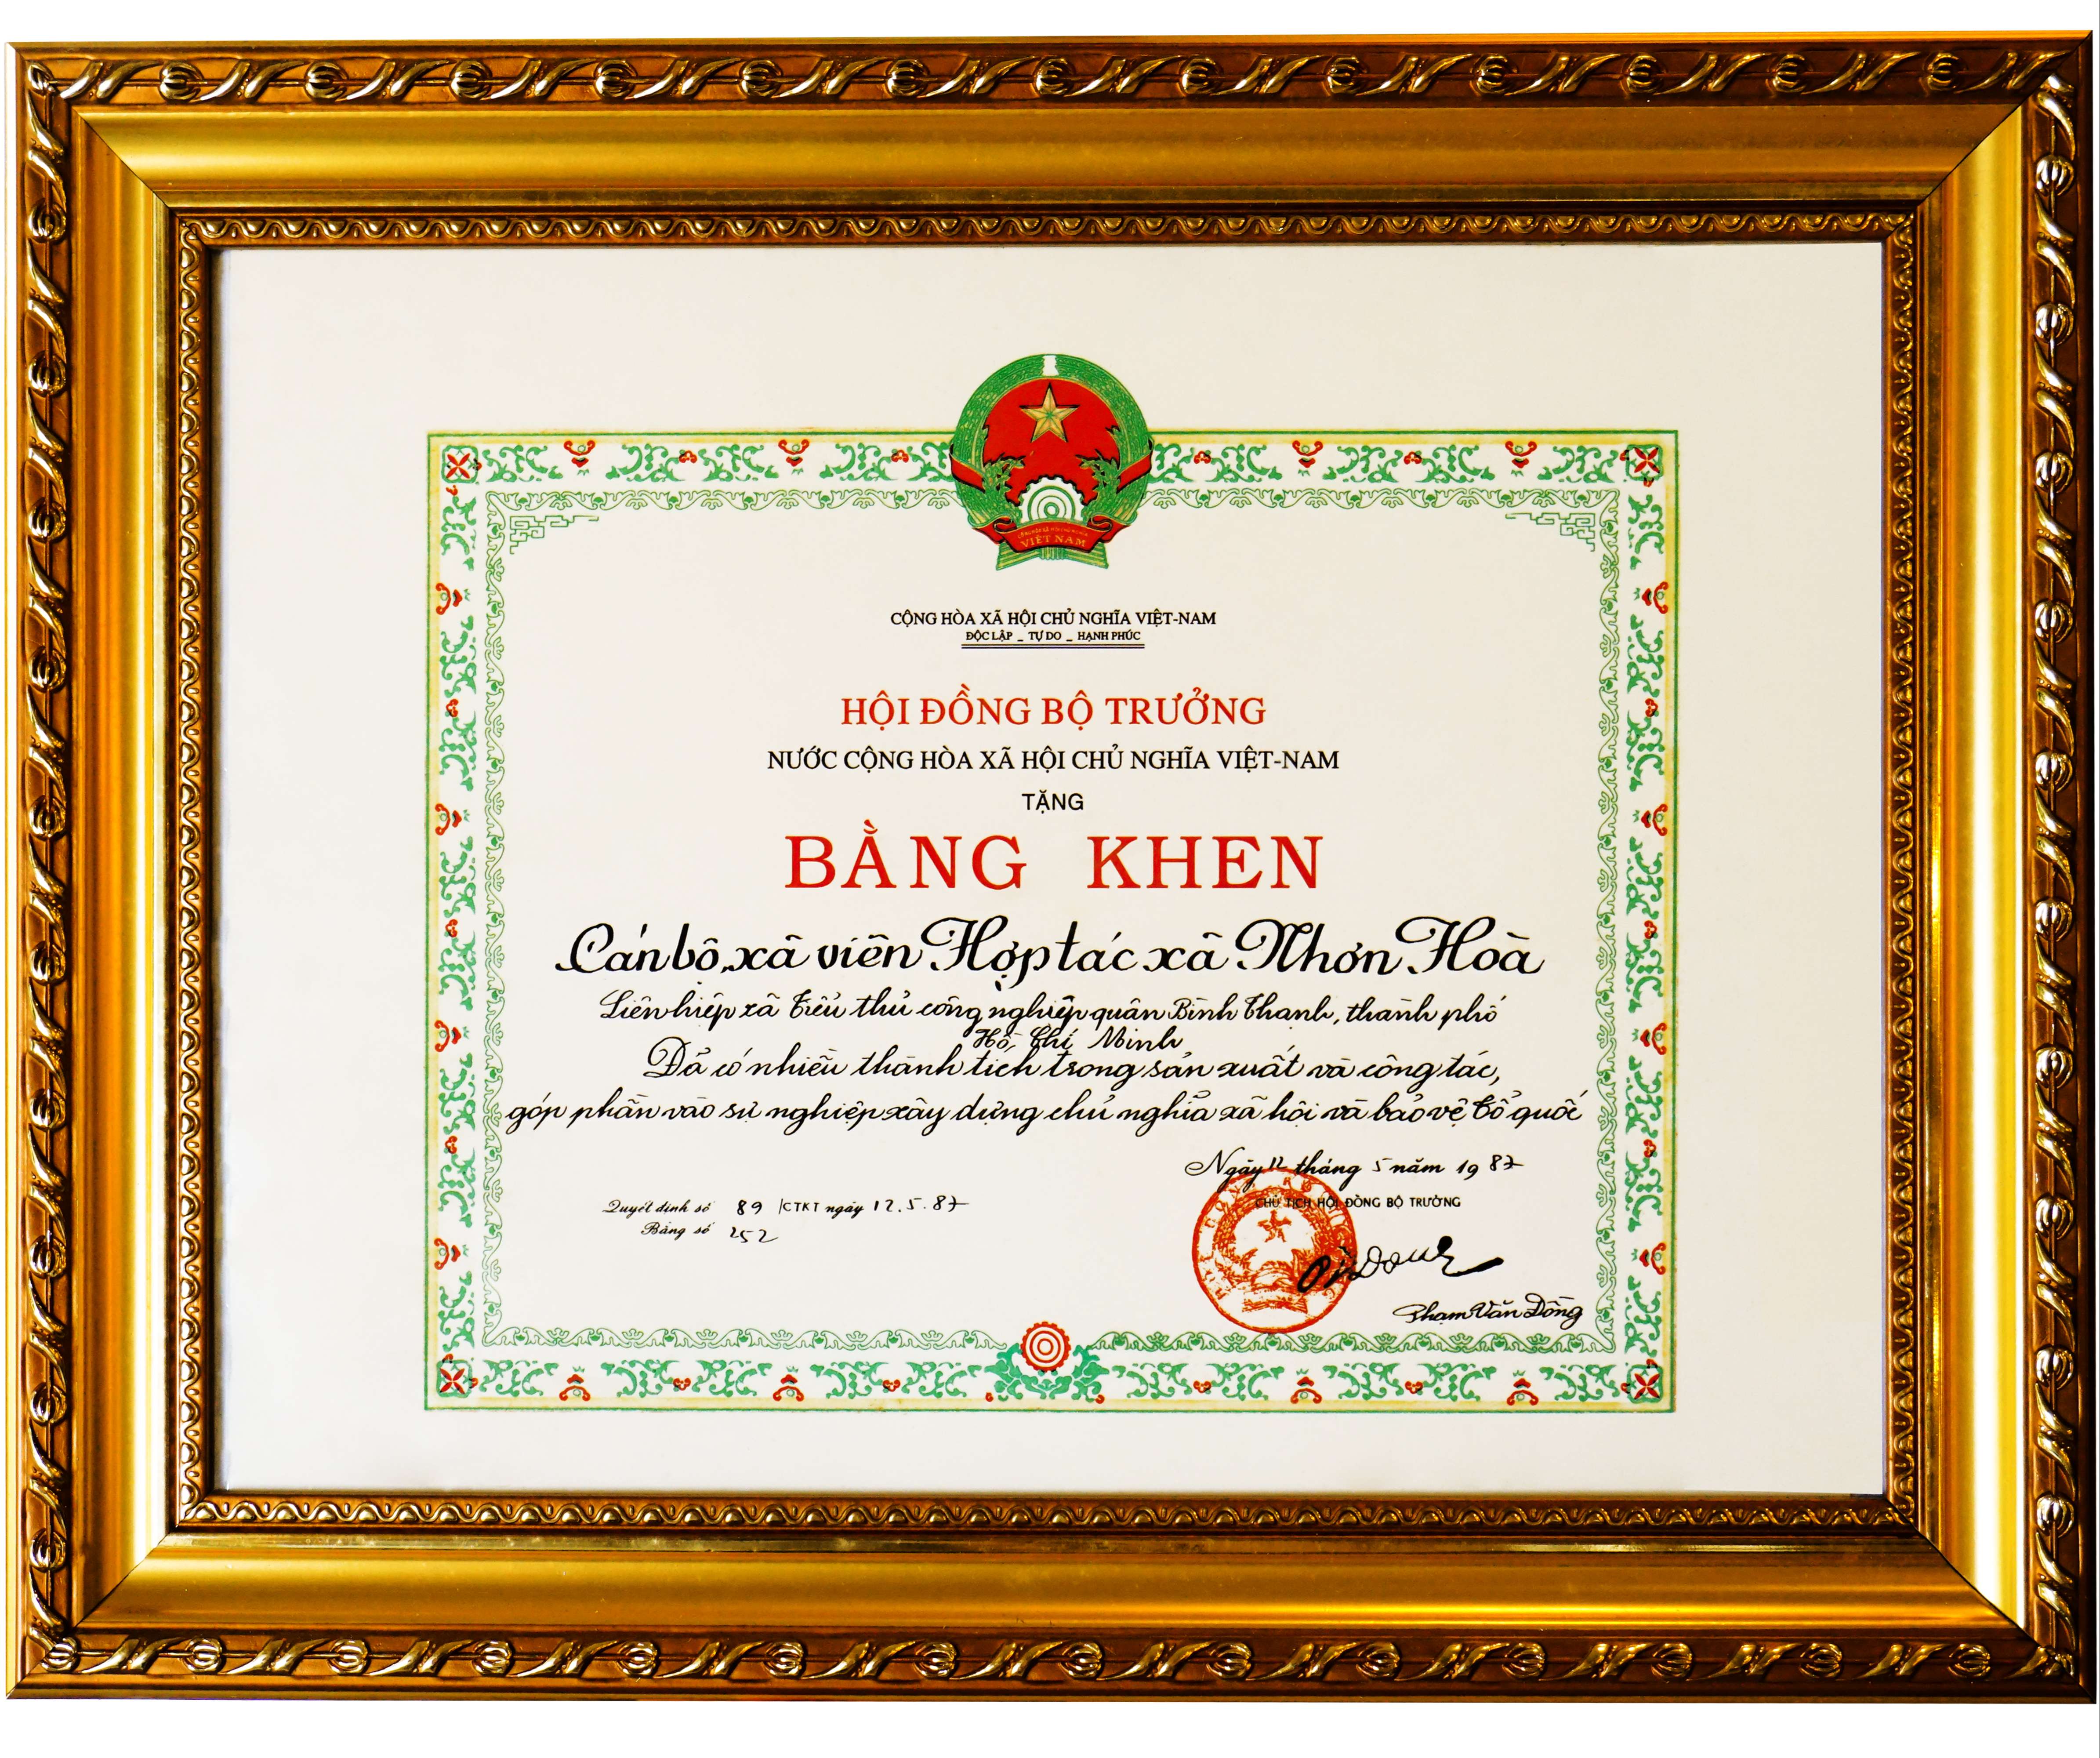 the-council-of-ministers-commended-nhon-hoa-cooperative-for-its-achievements-in-production-and-work-in-1987